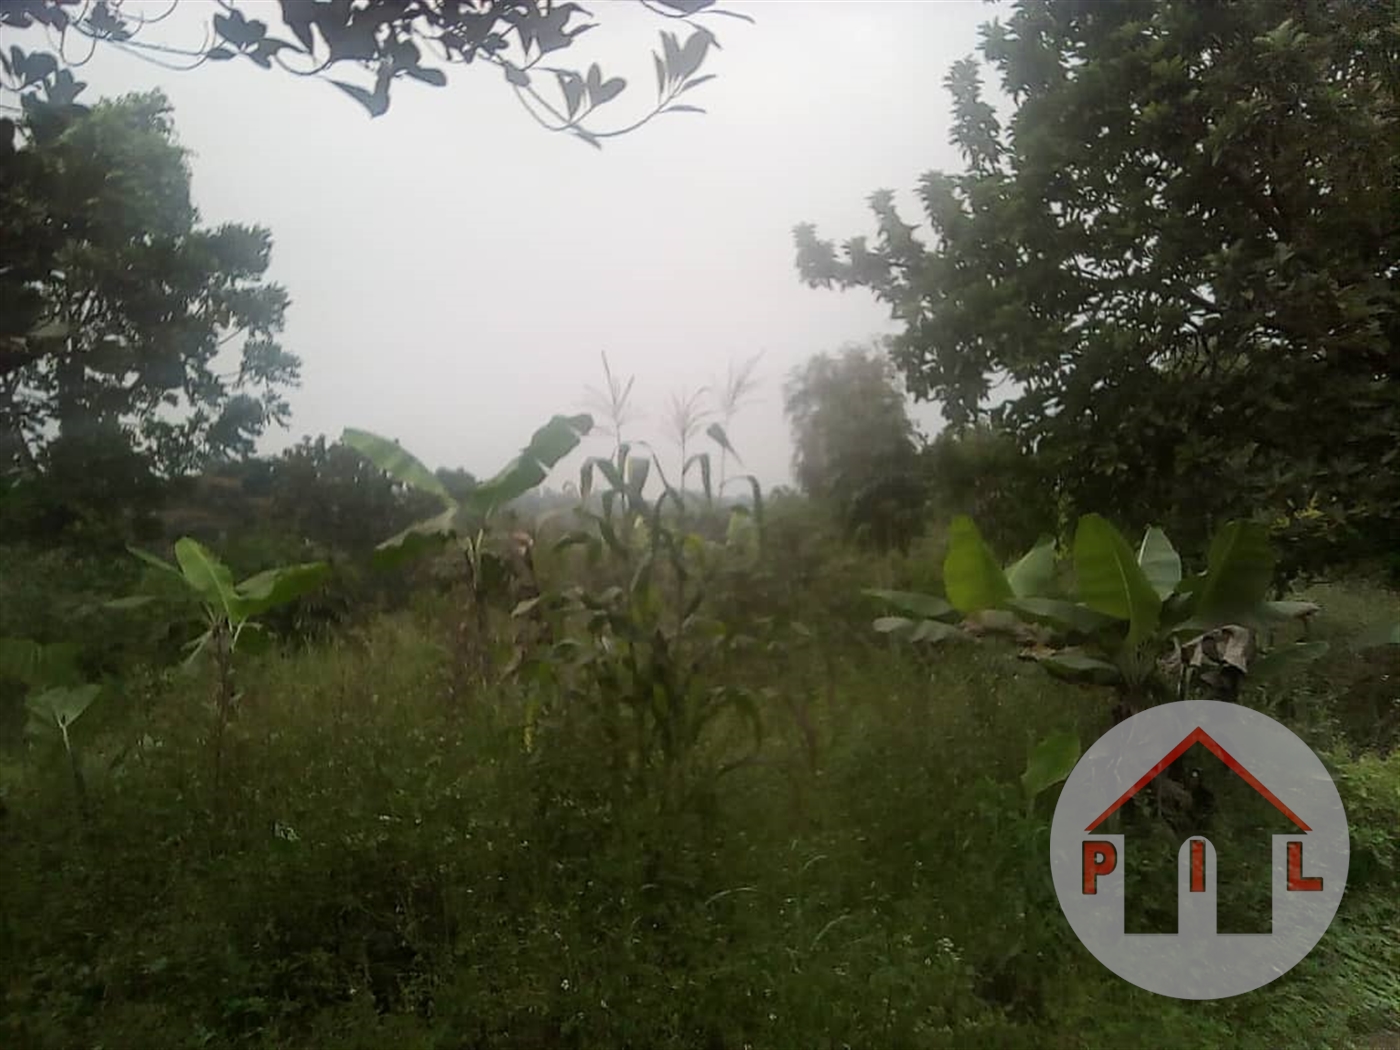 Agricultural Land for sale in Katosi Mukono